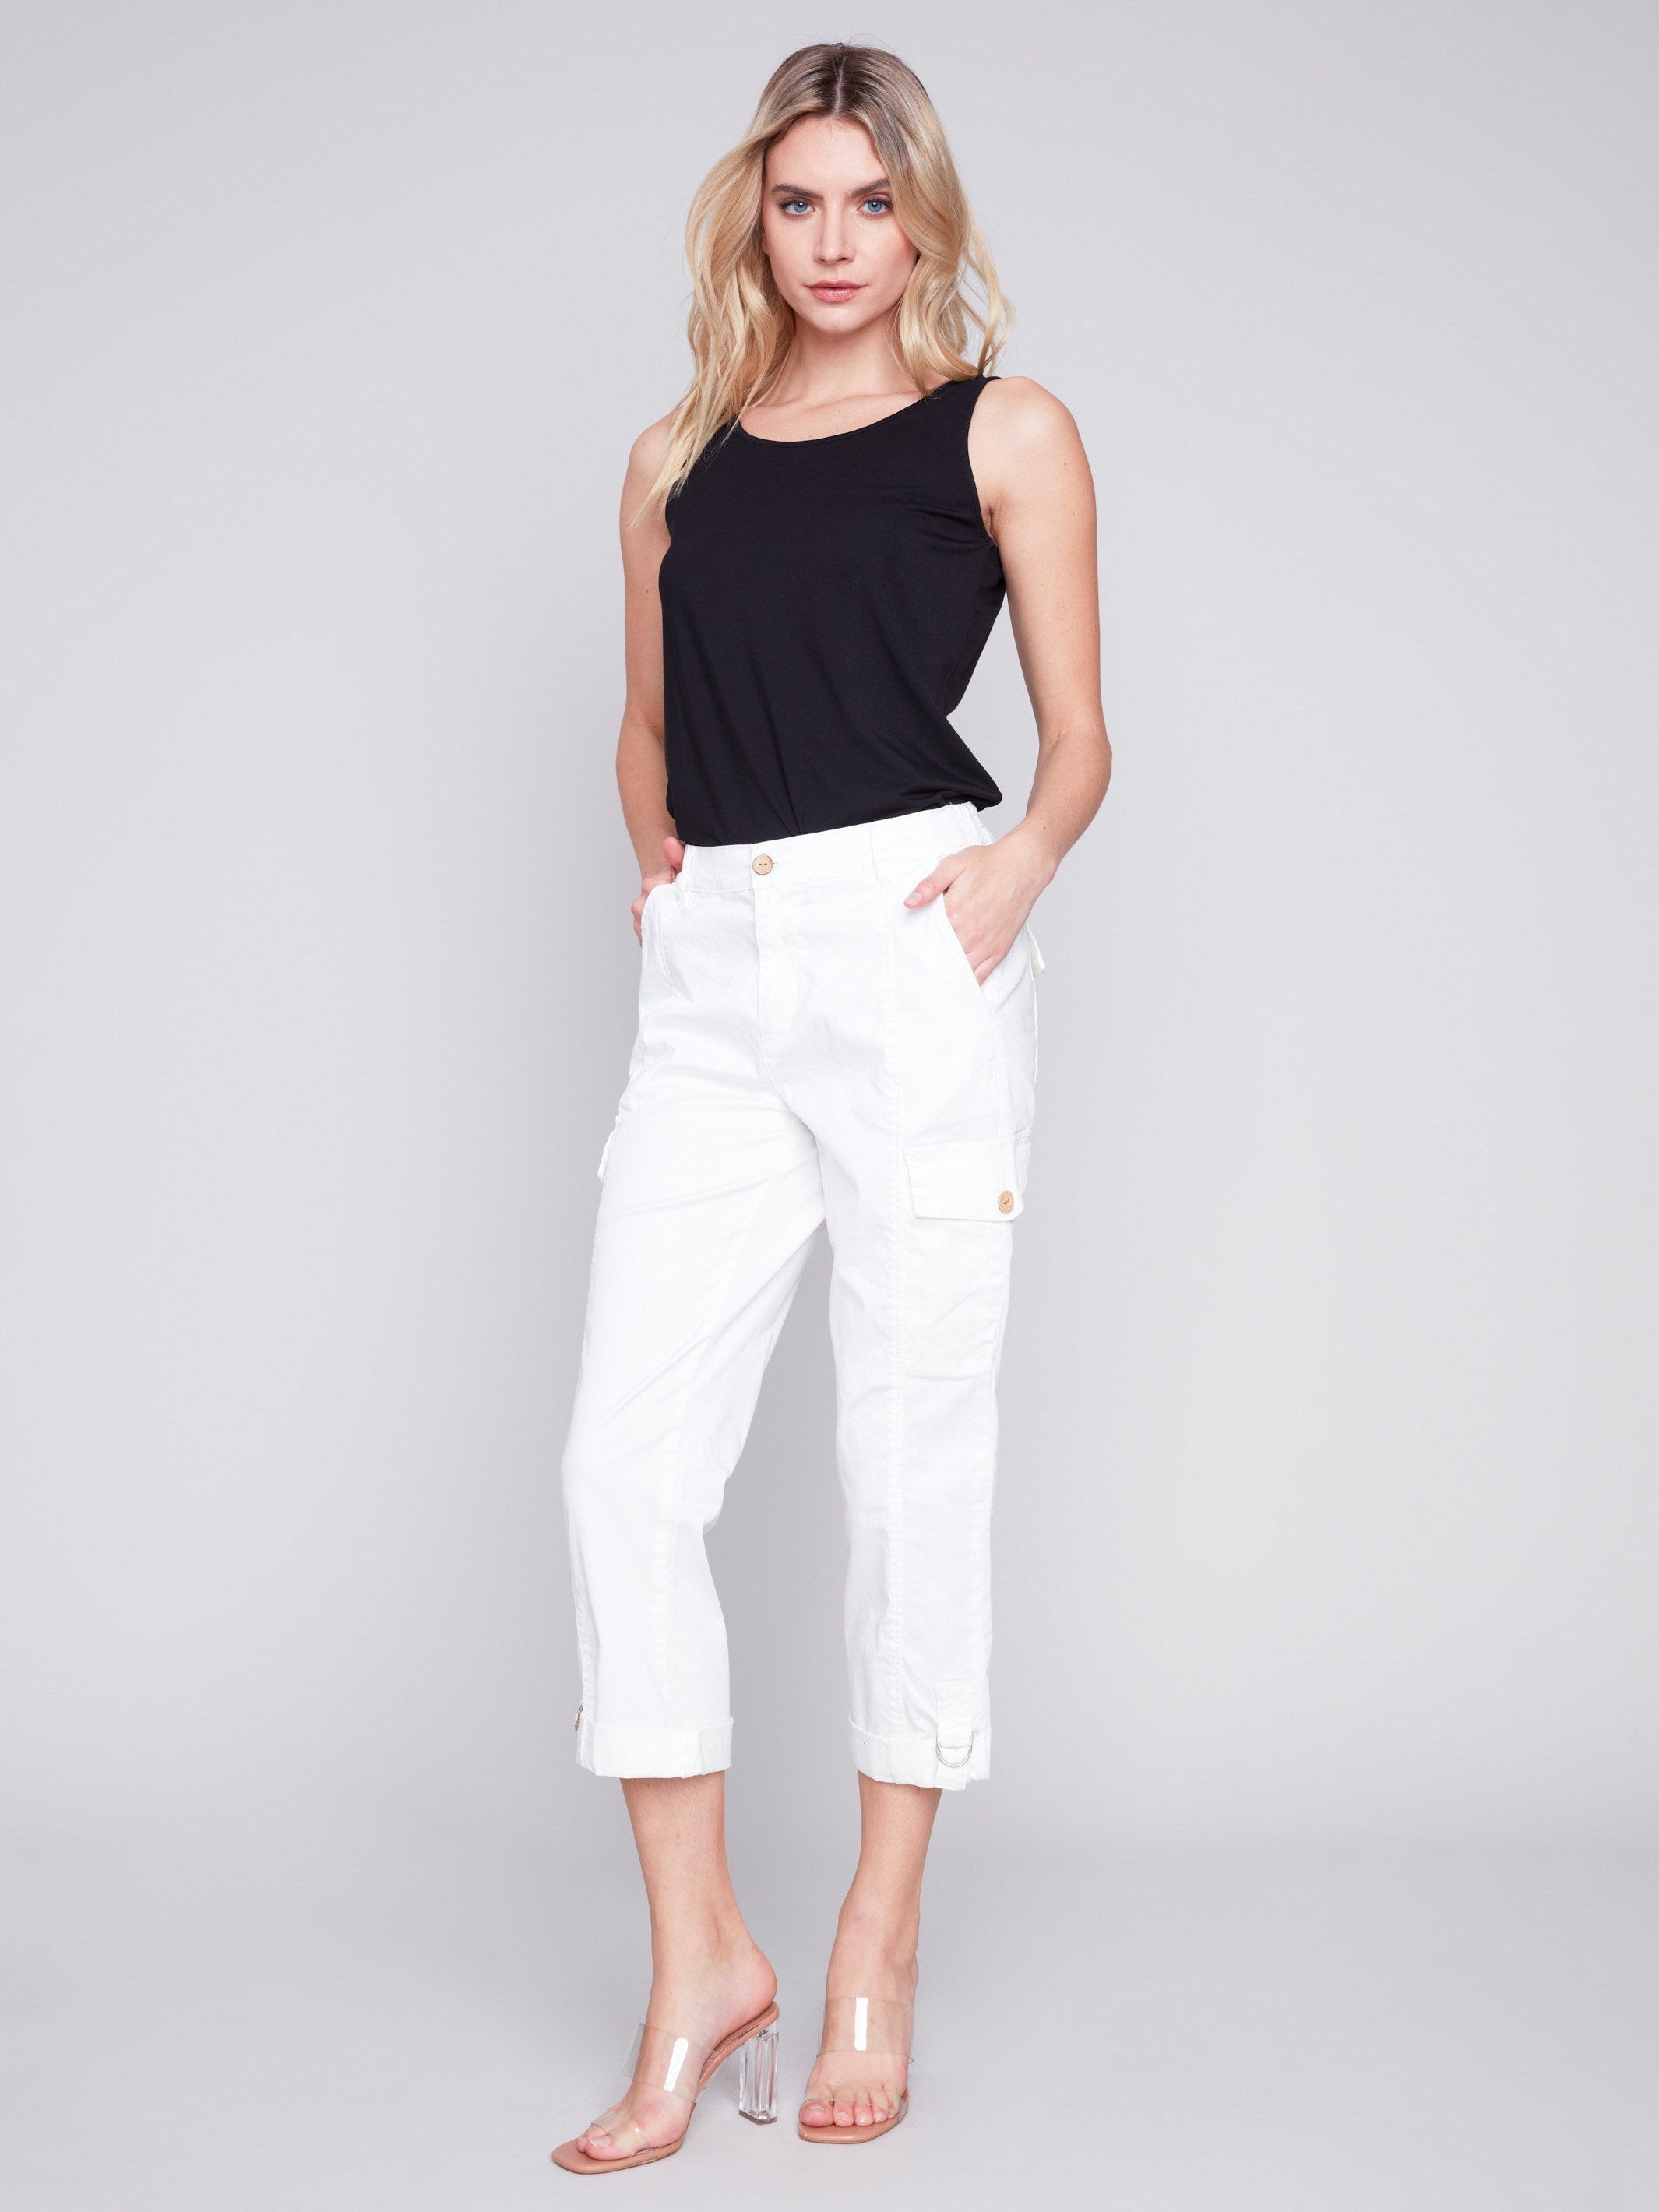 Cotton Canvas Cargo Pants - White - Charlie B Collection Canada - Image 1